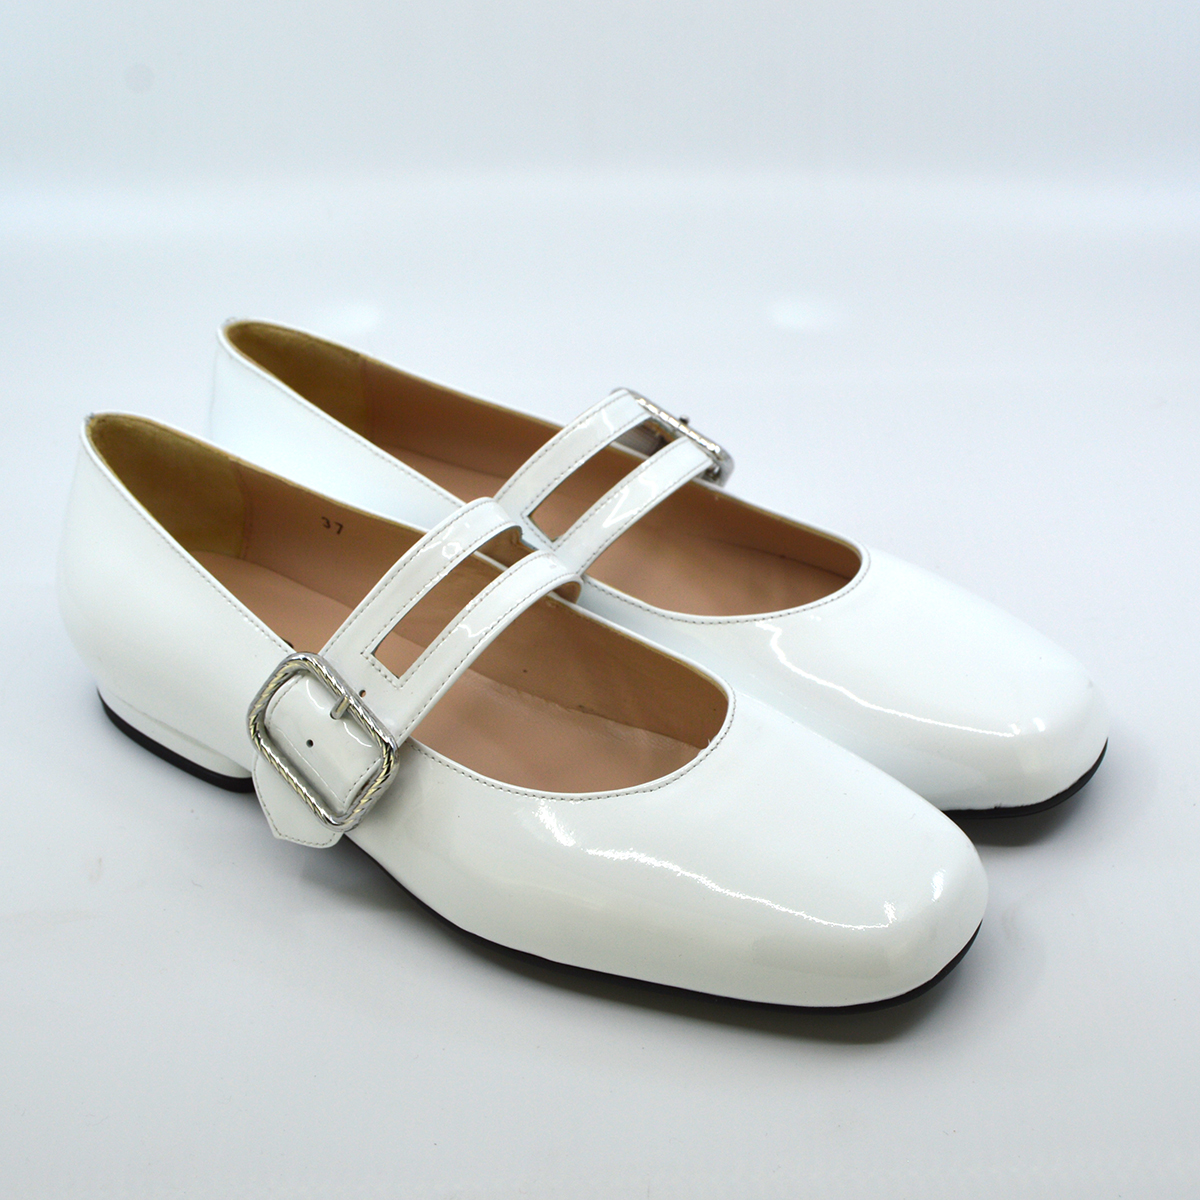 The Prudence – Ladies Flat Retro Vintage 60's Twiggy Style Shoe in